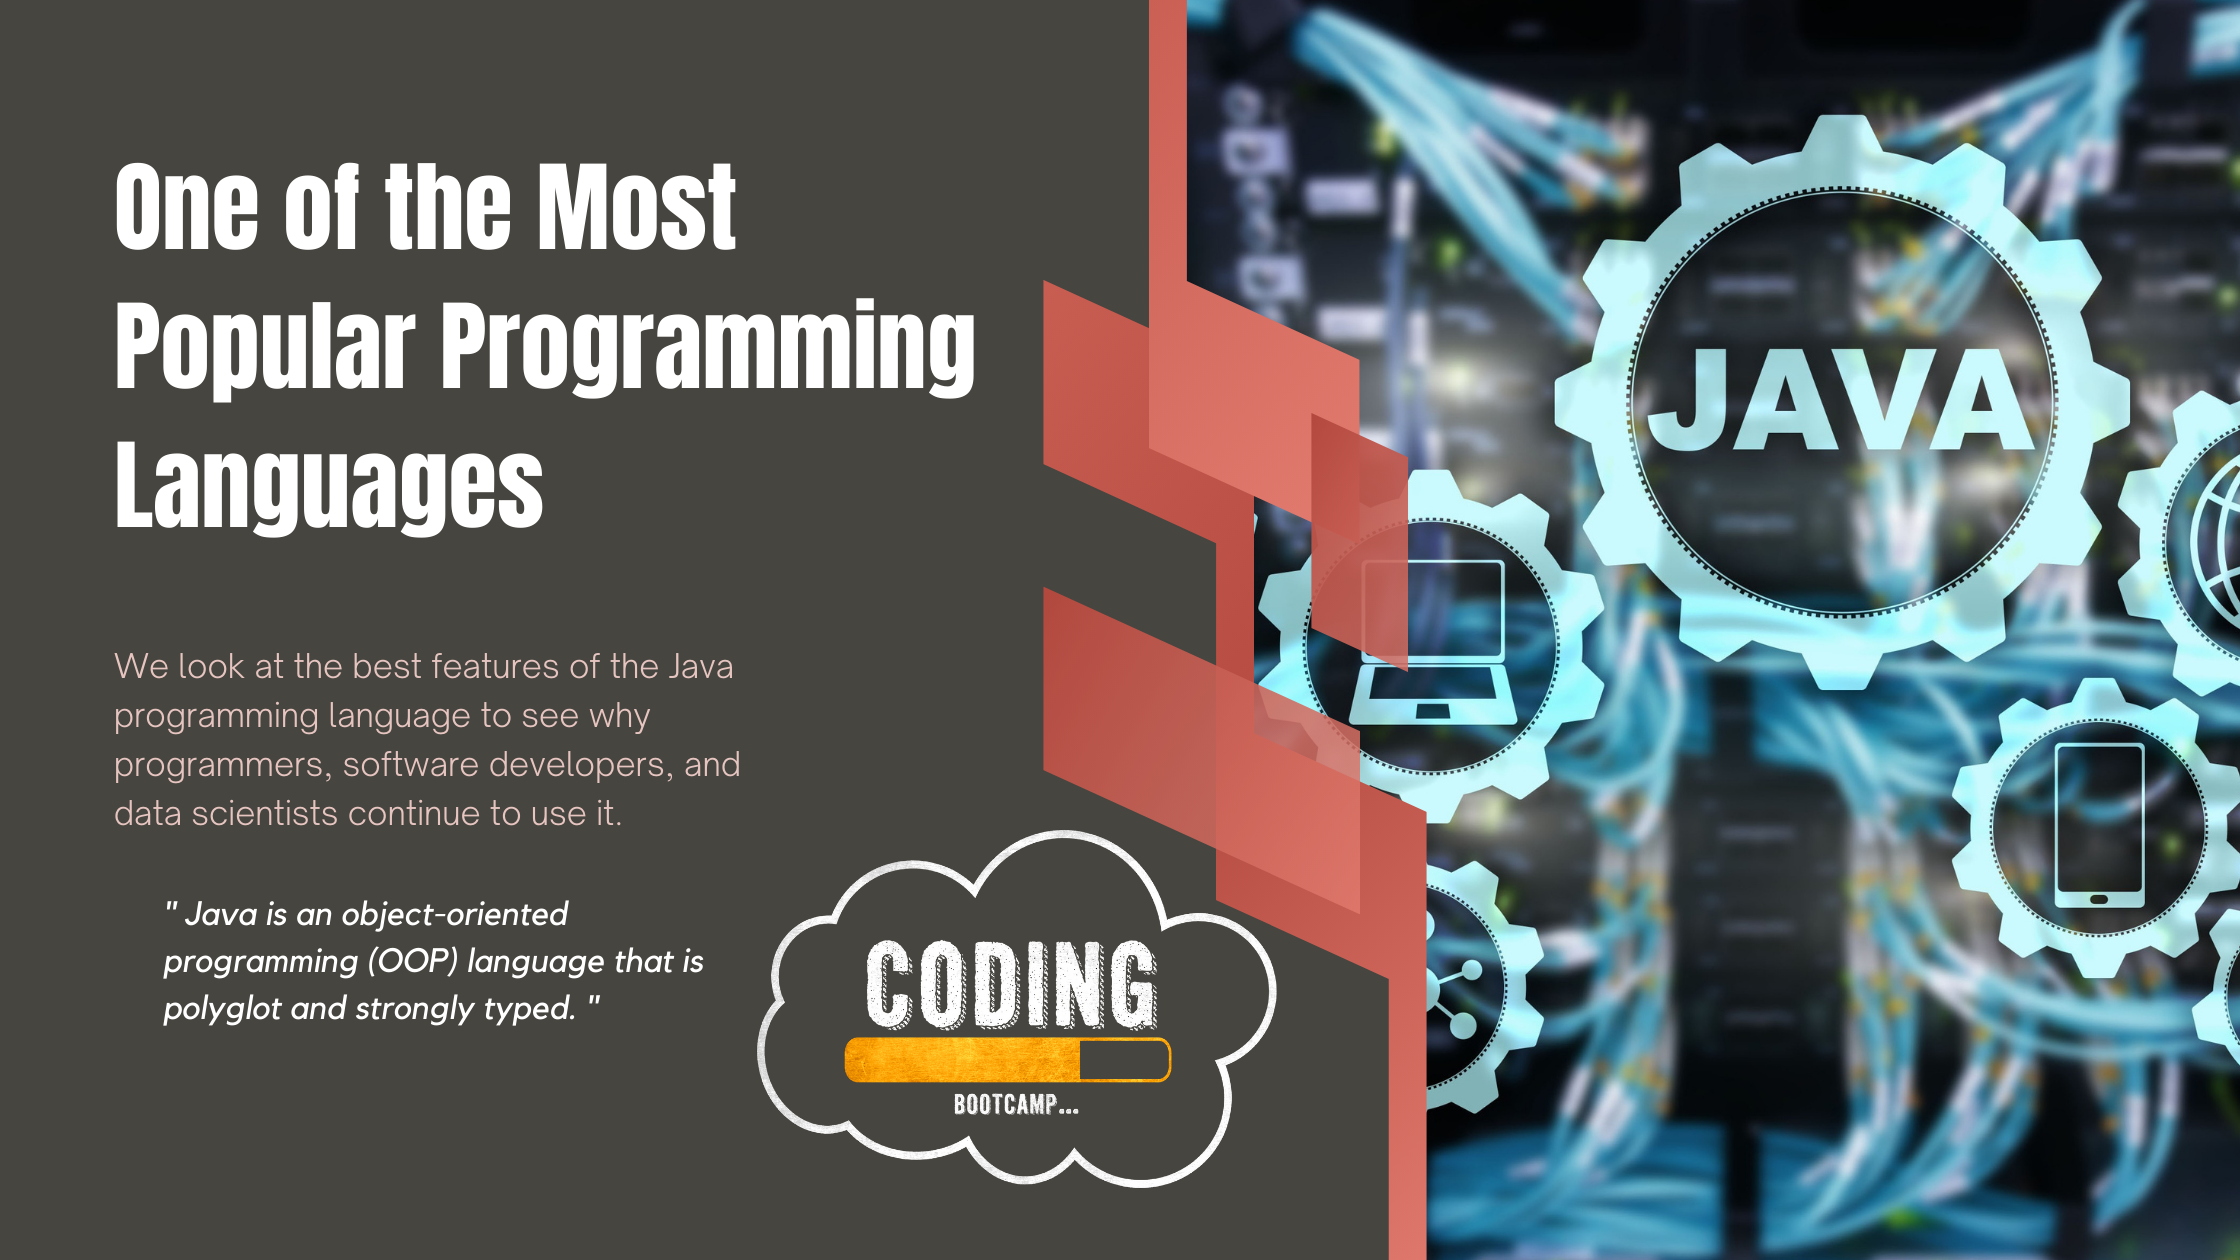 One of the Most Popular Programming Languages